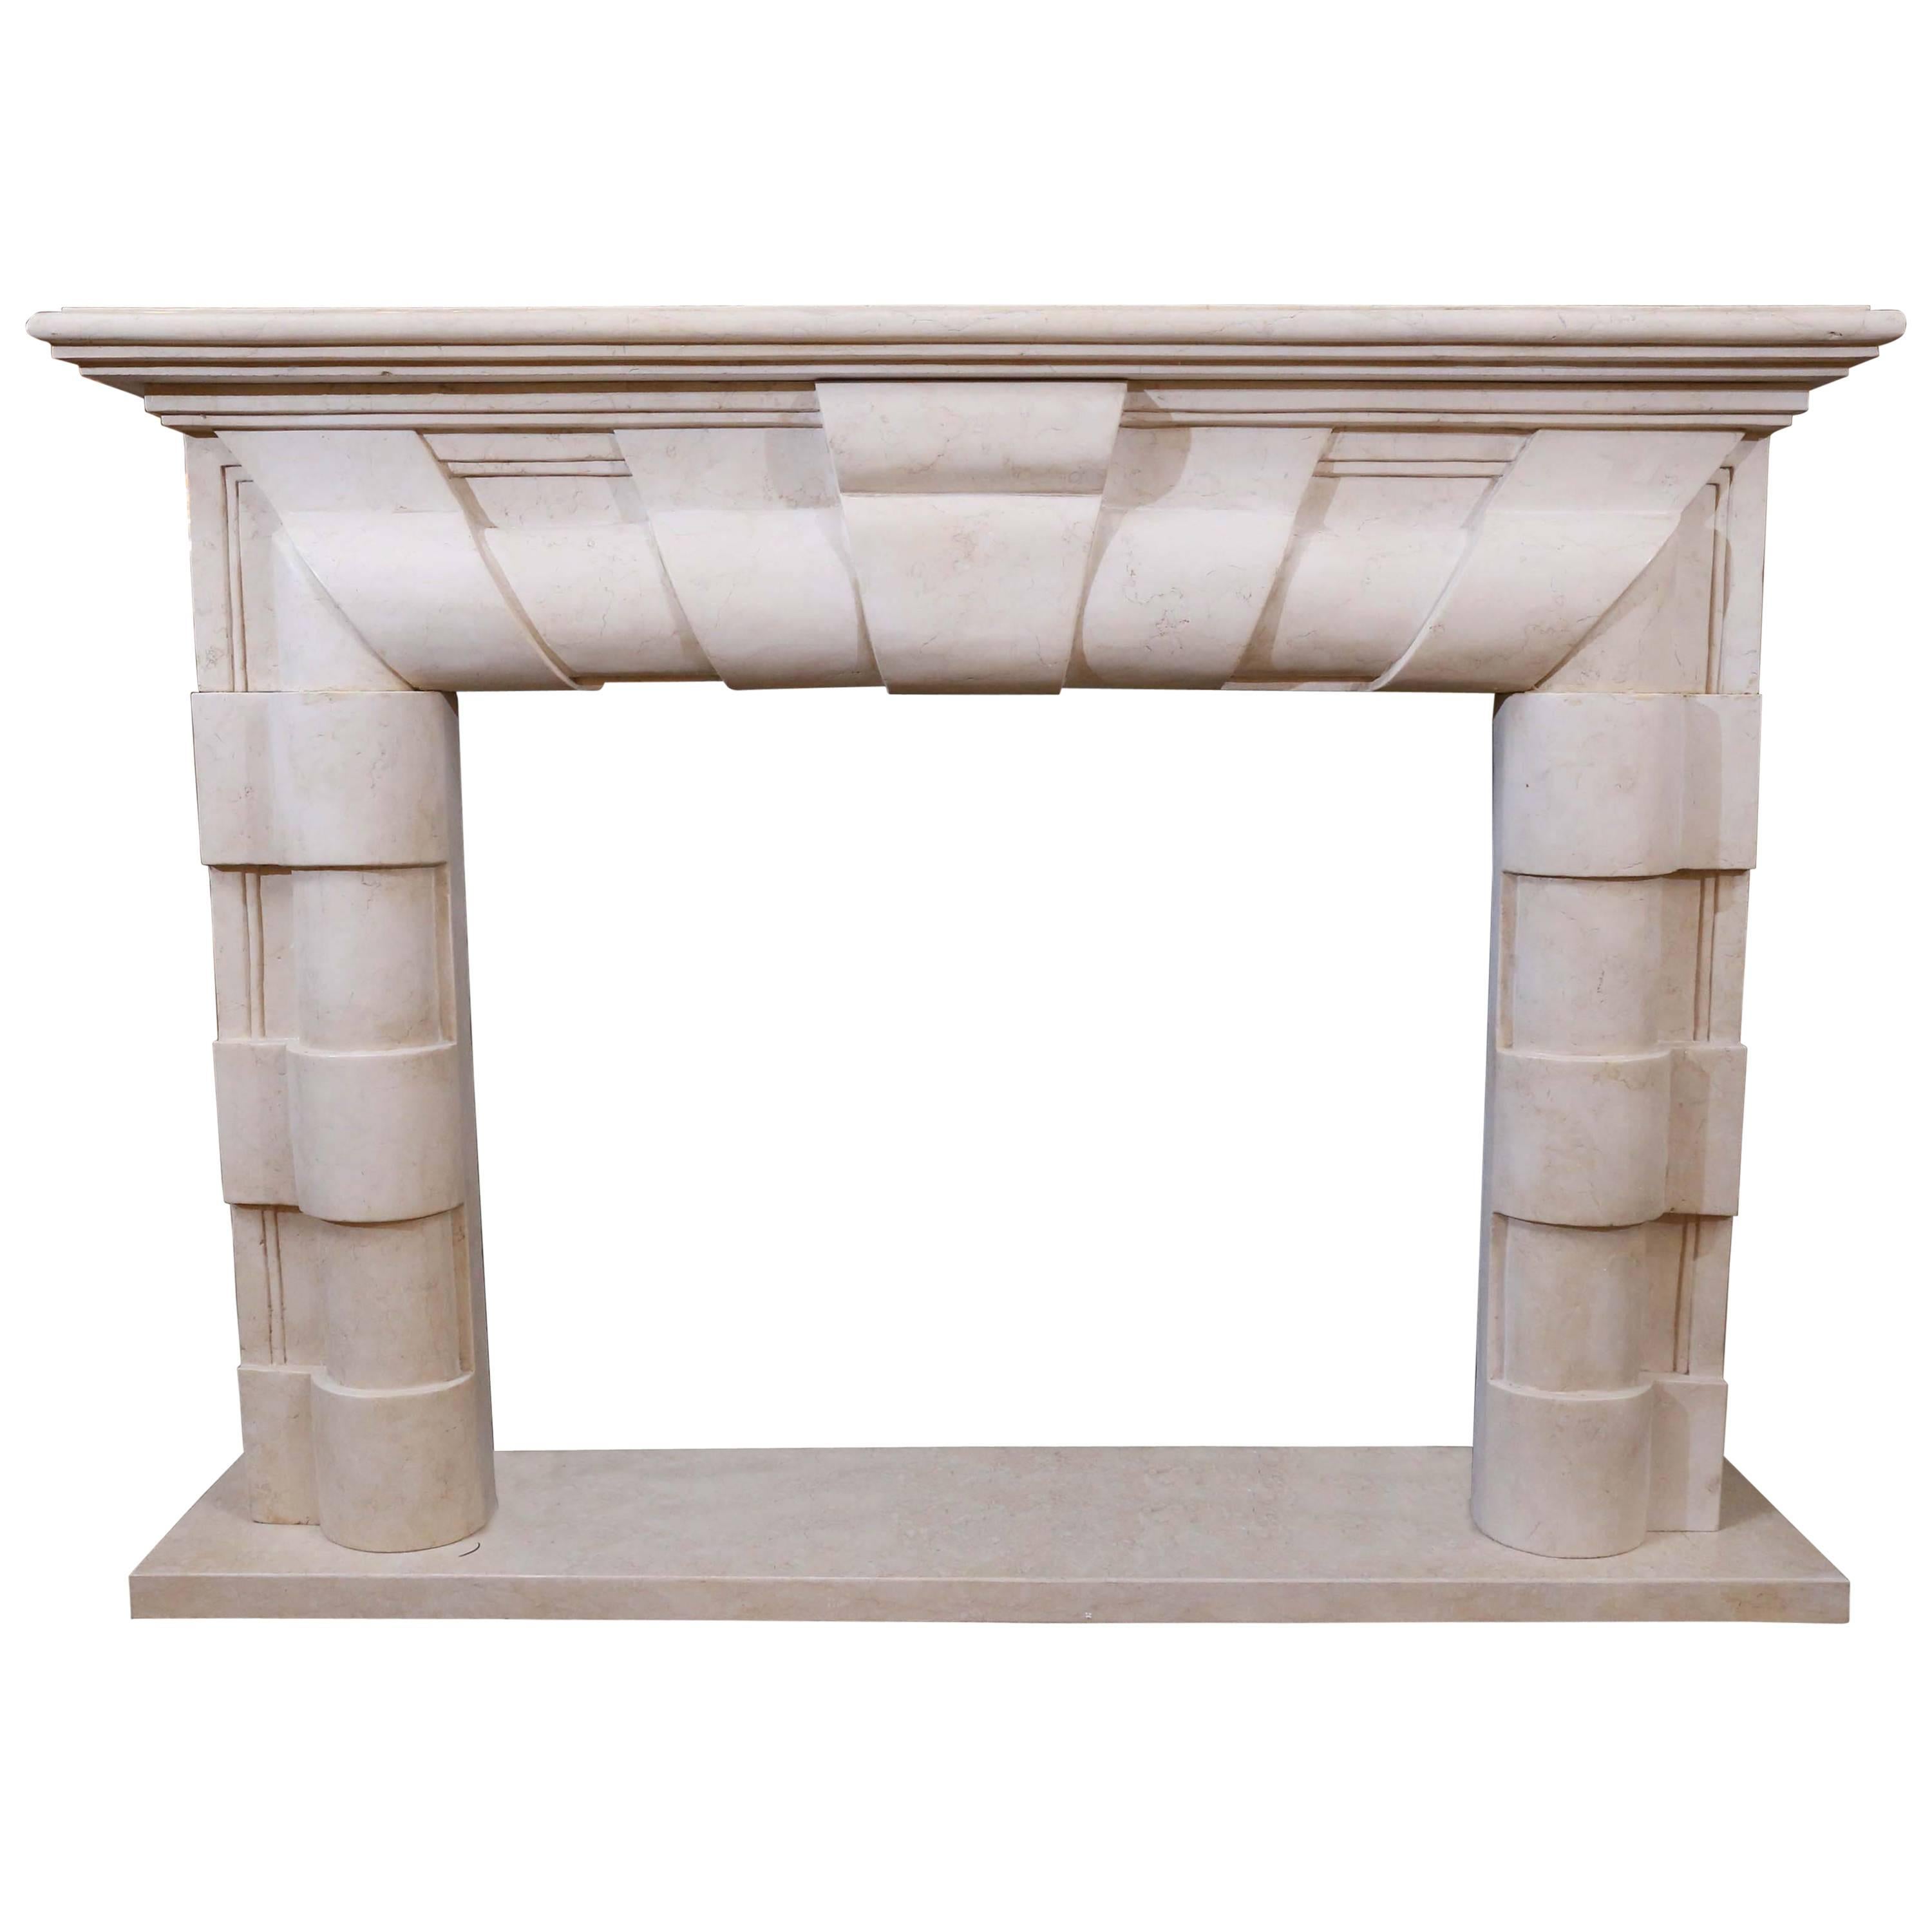 Marble Mantel in Art Deco Style, Hand-Carved Stone in Pale Cream Color